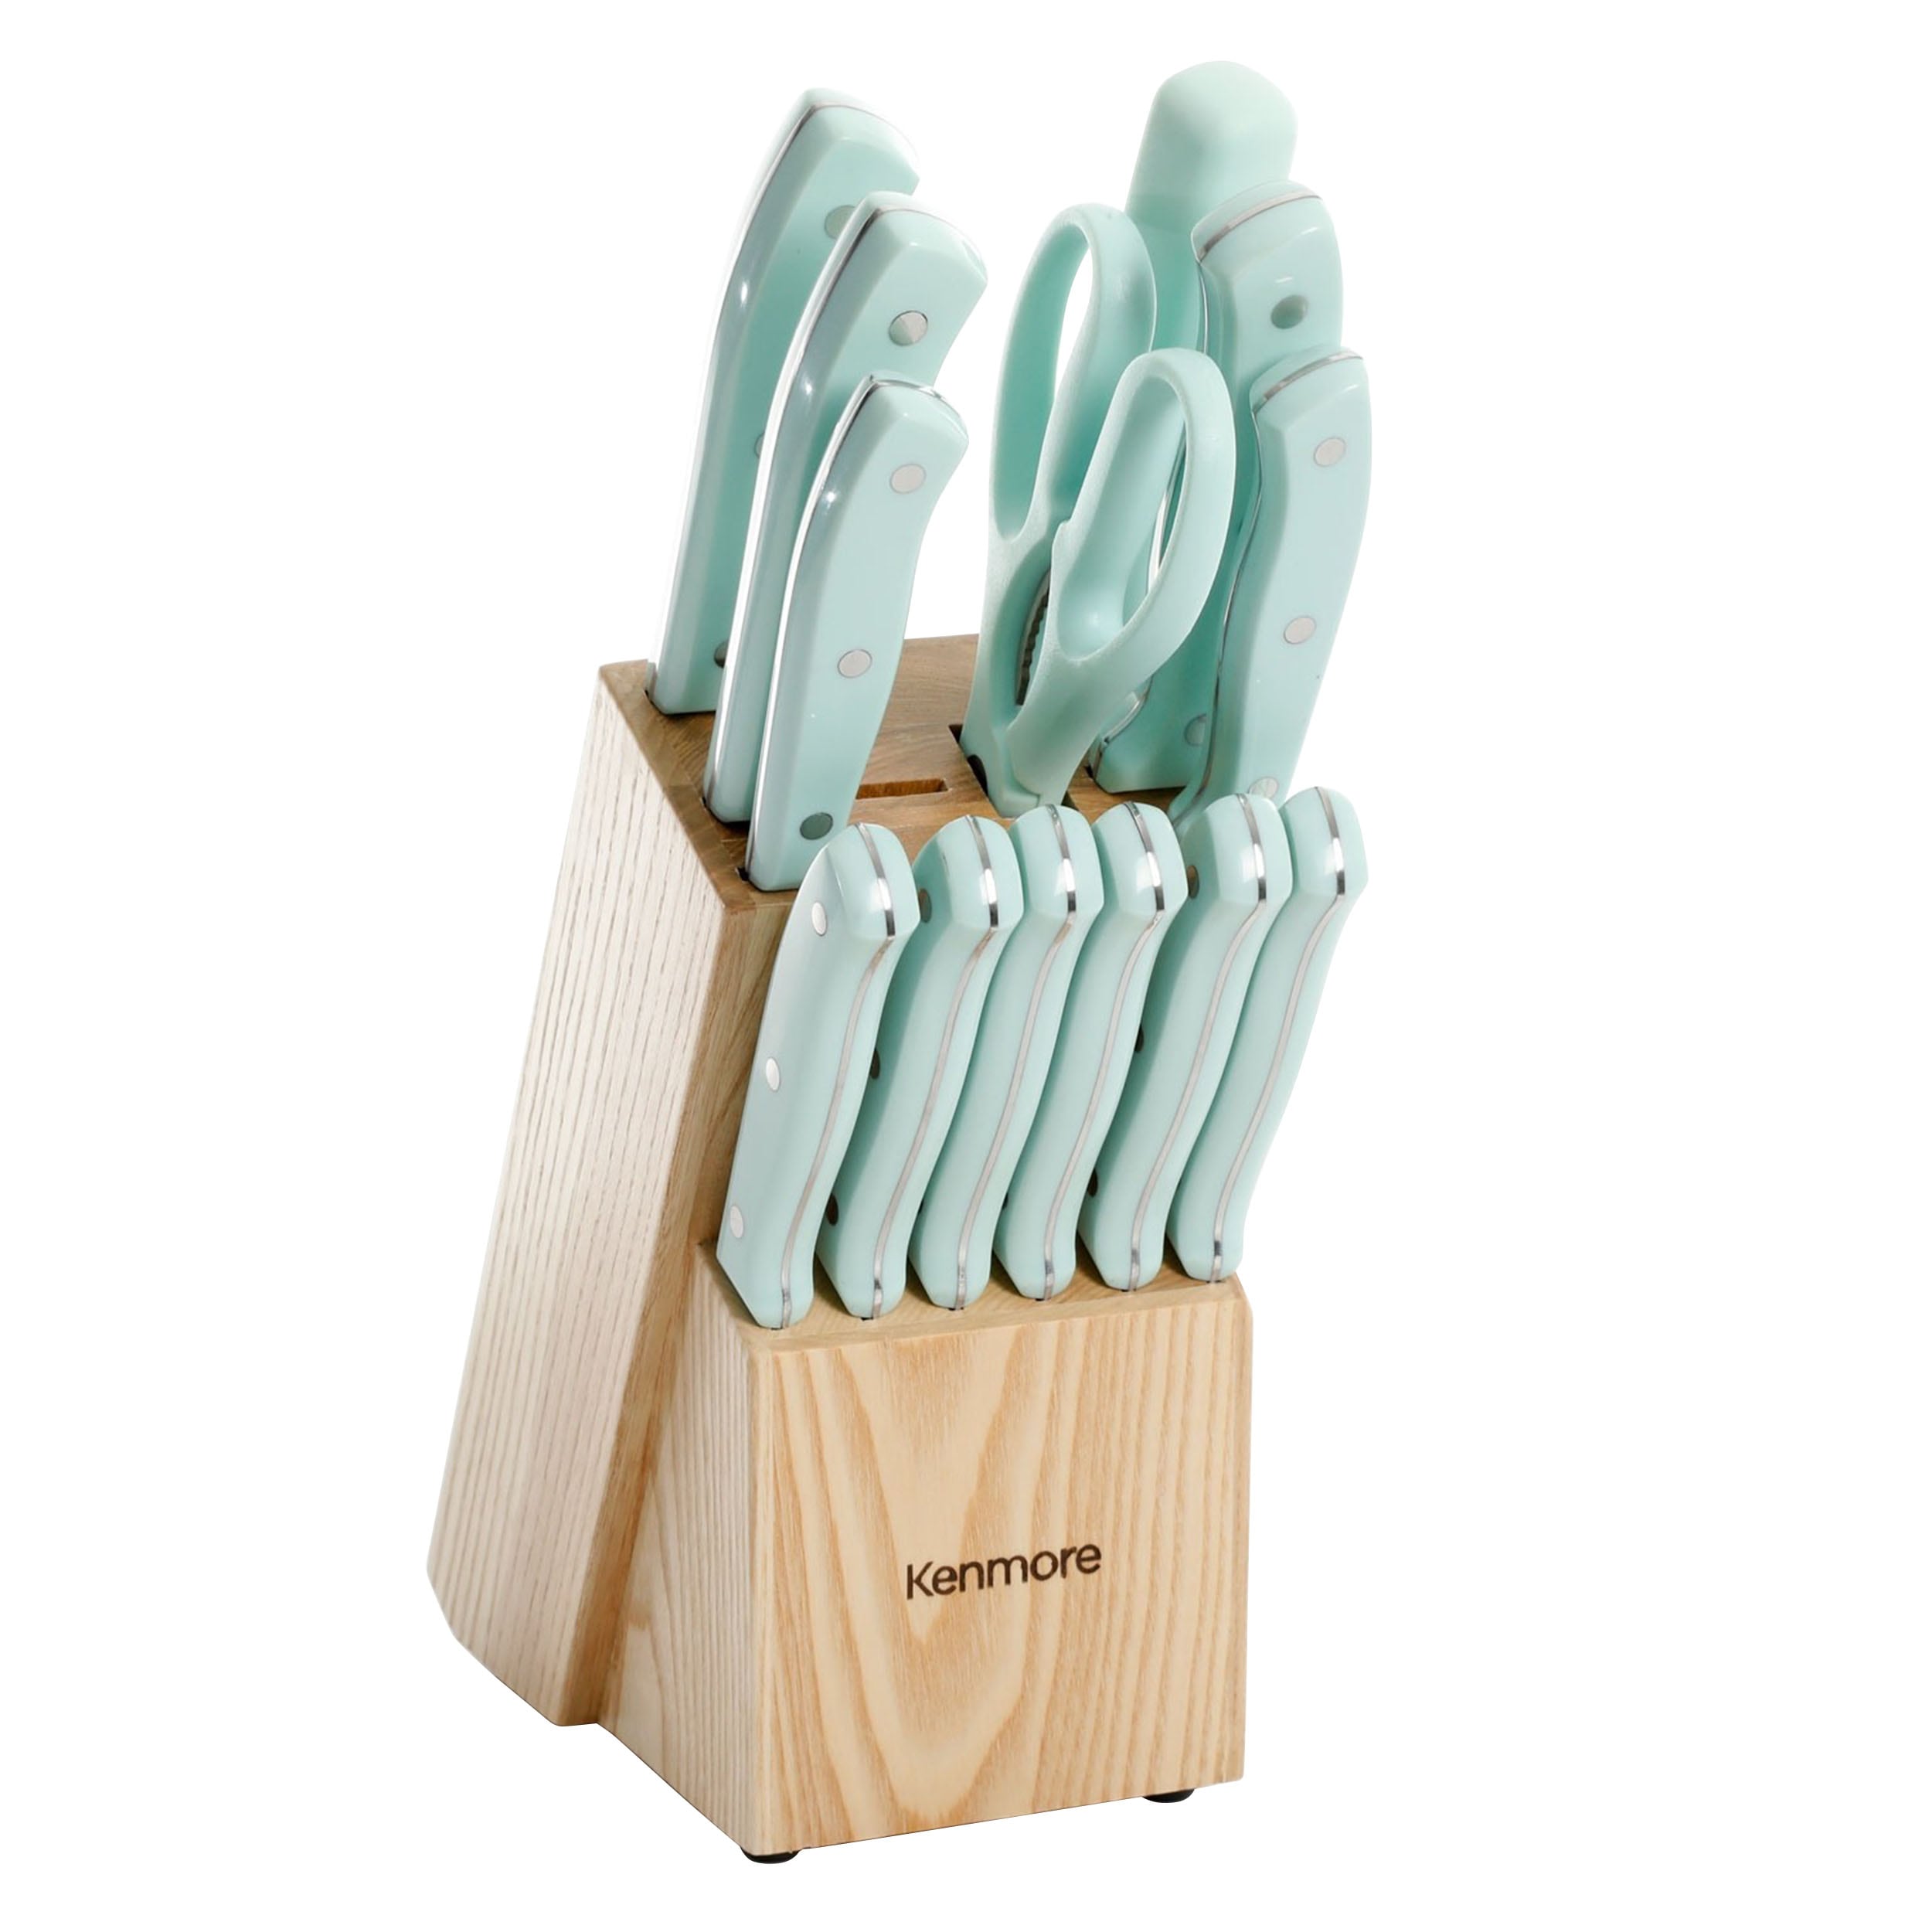 Oster Lindbergh 14 Piece Teal Cutlery Set - Stainless Steel Blades